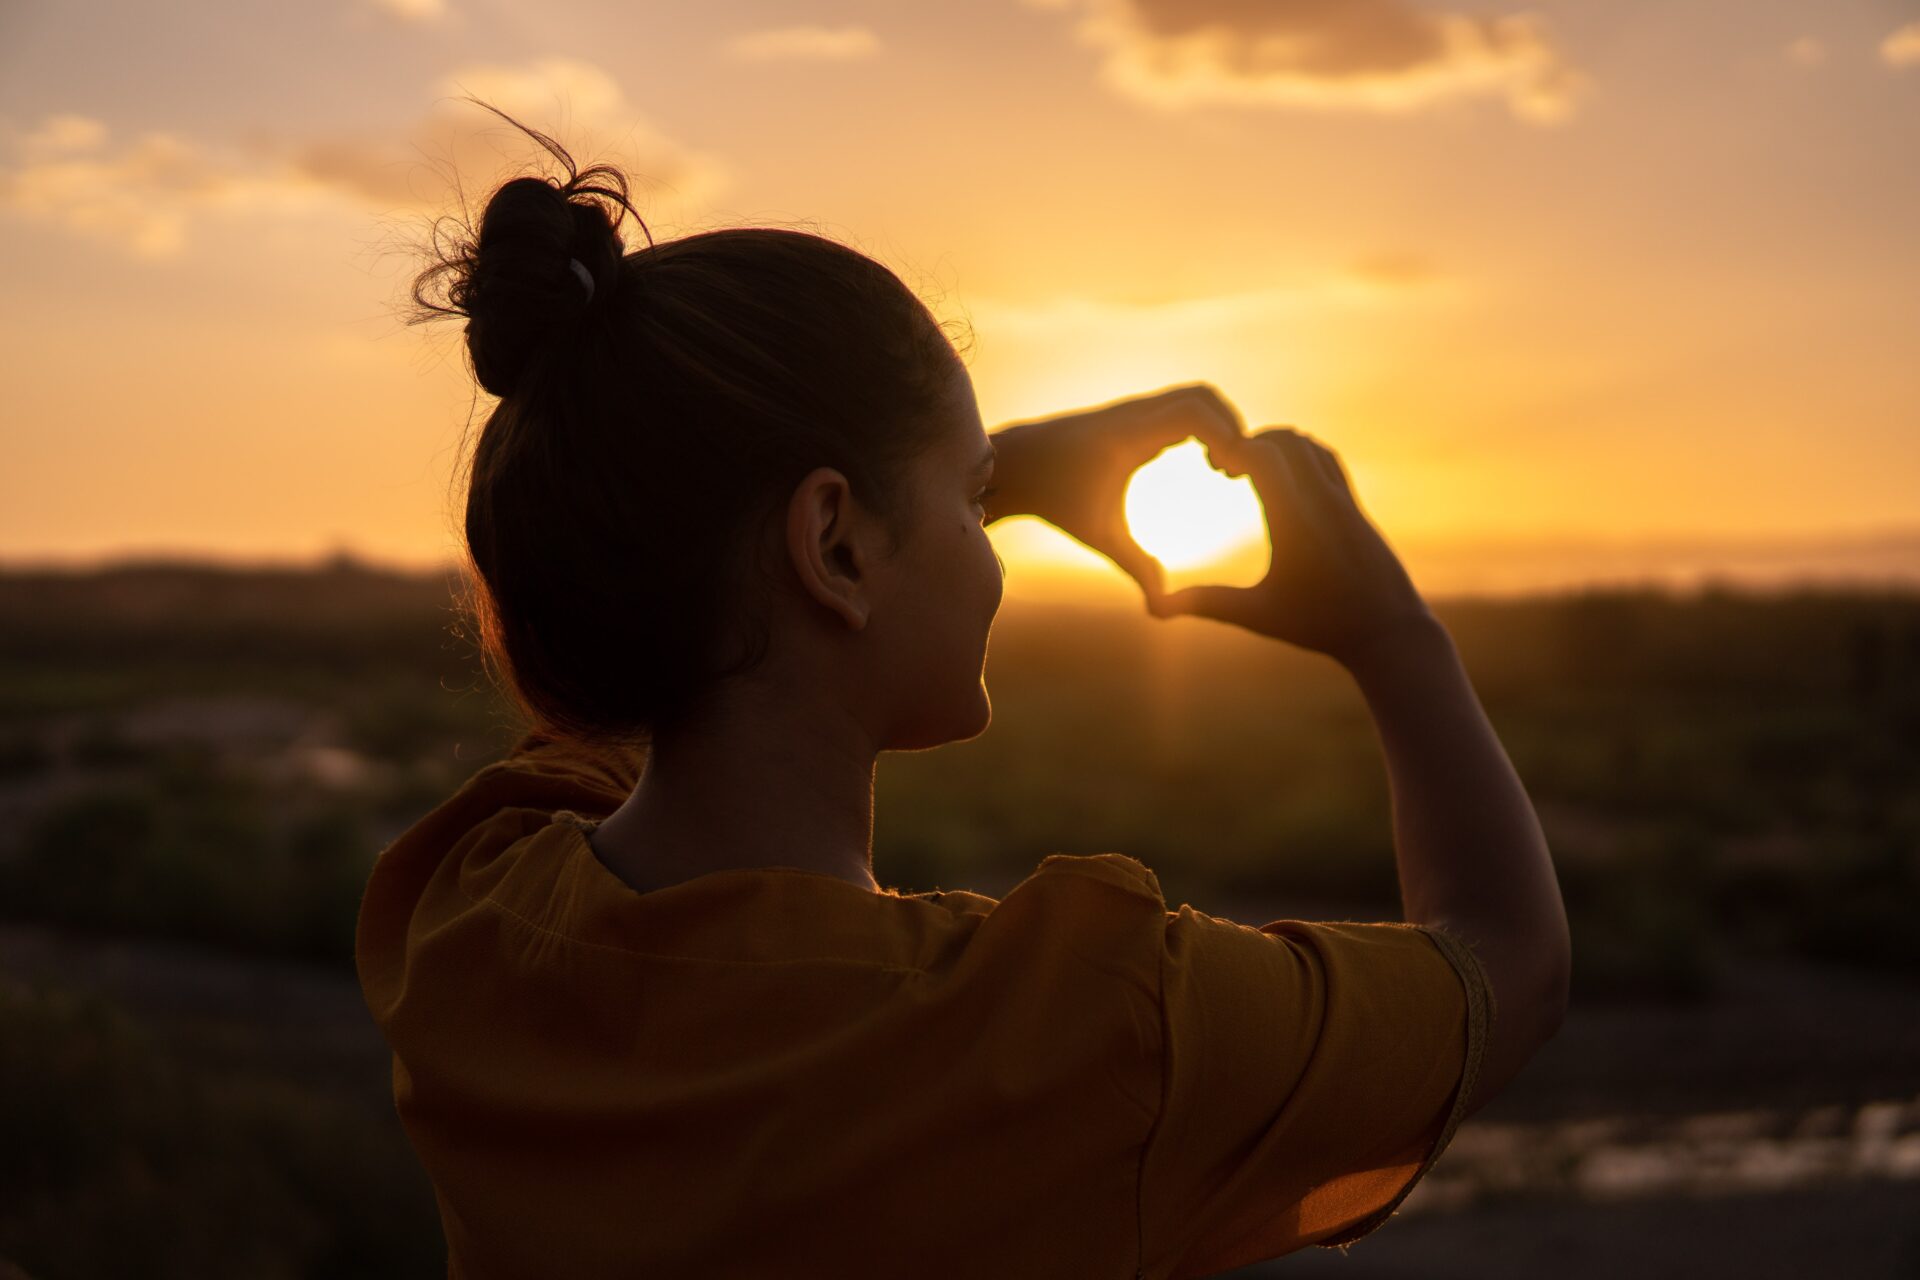 A lady holding up a heart in front of a sunset.